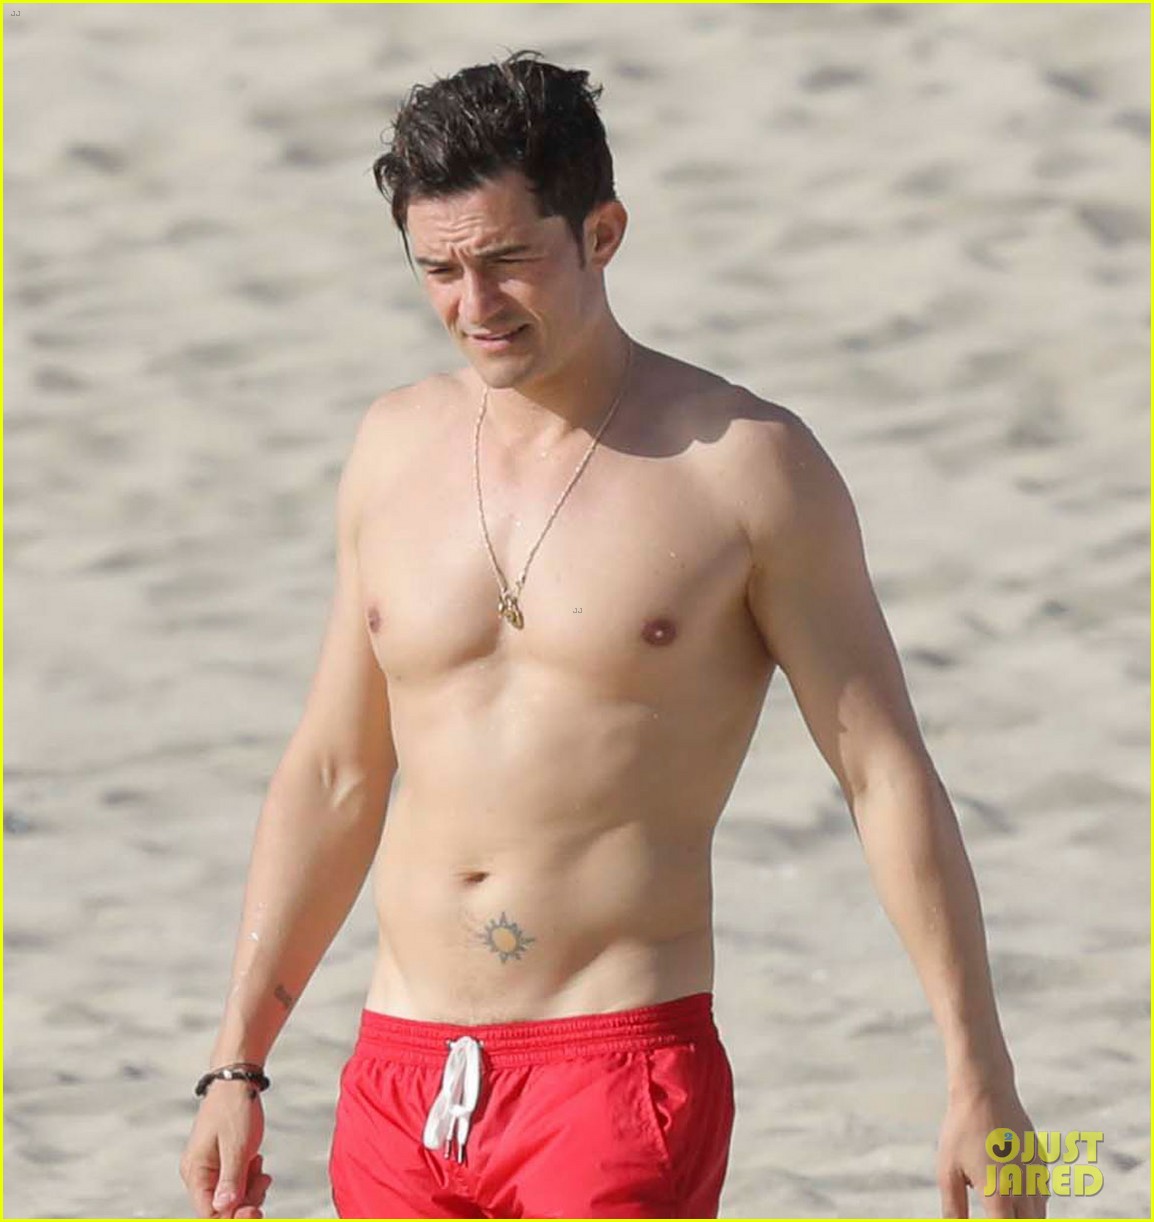 Orlando Bloom speaks out over paddle board nude photos and 